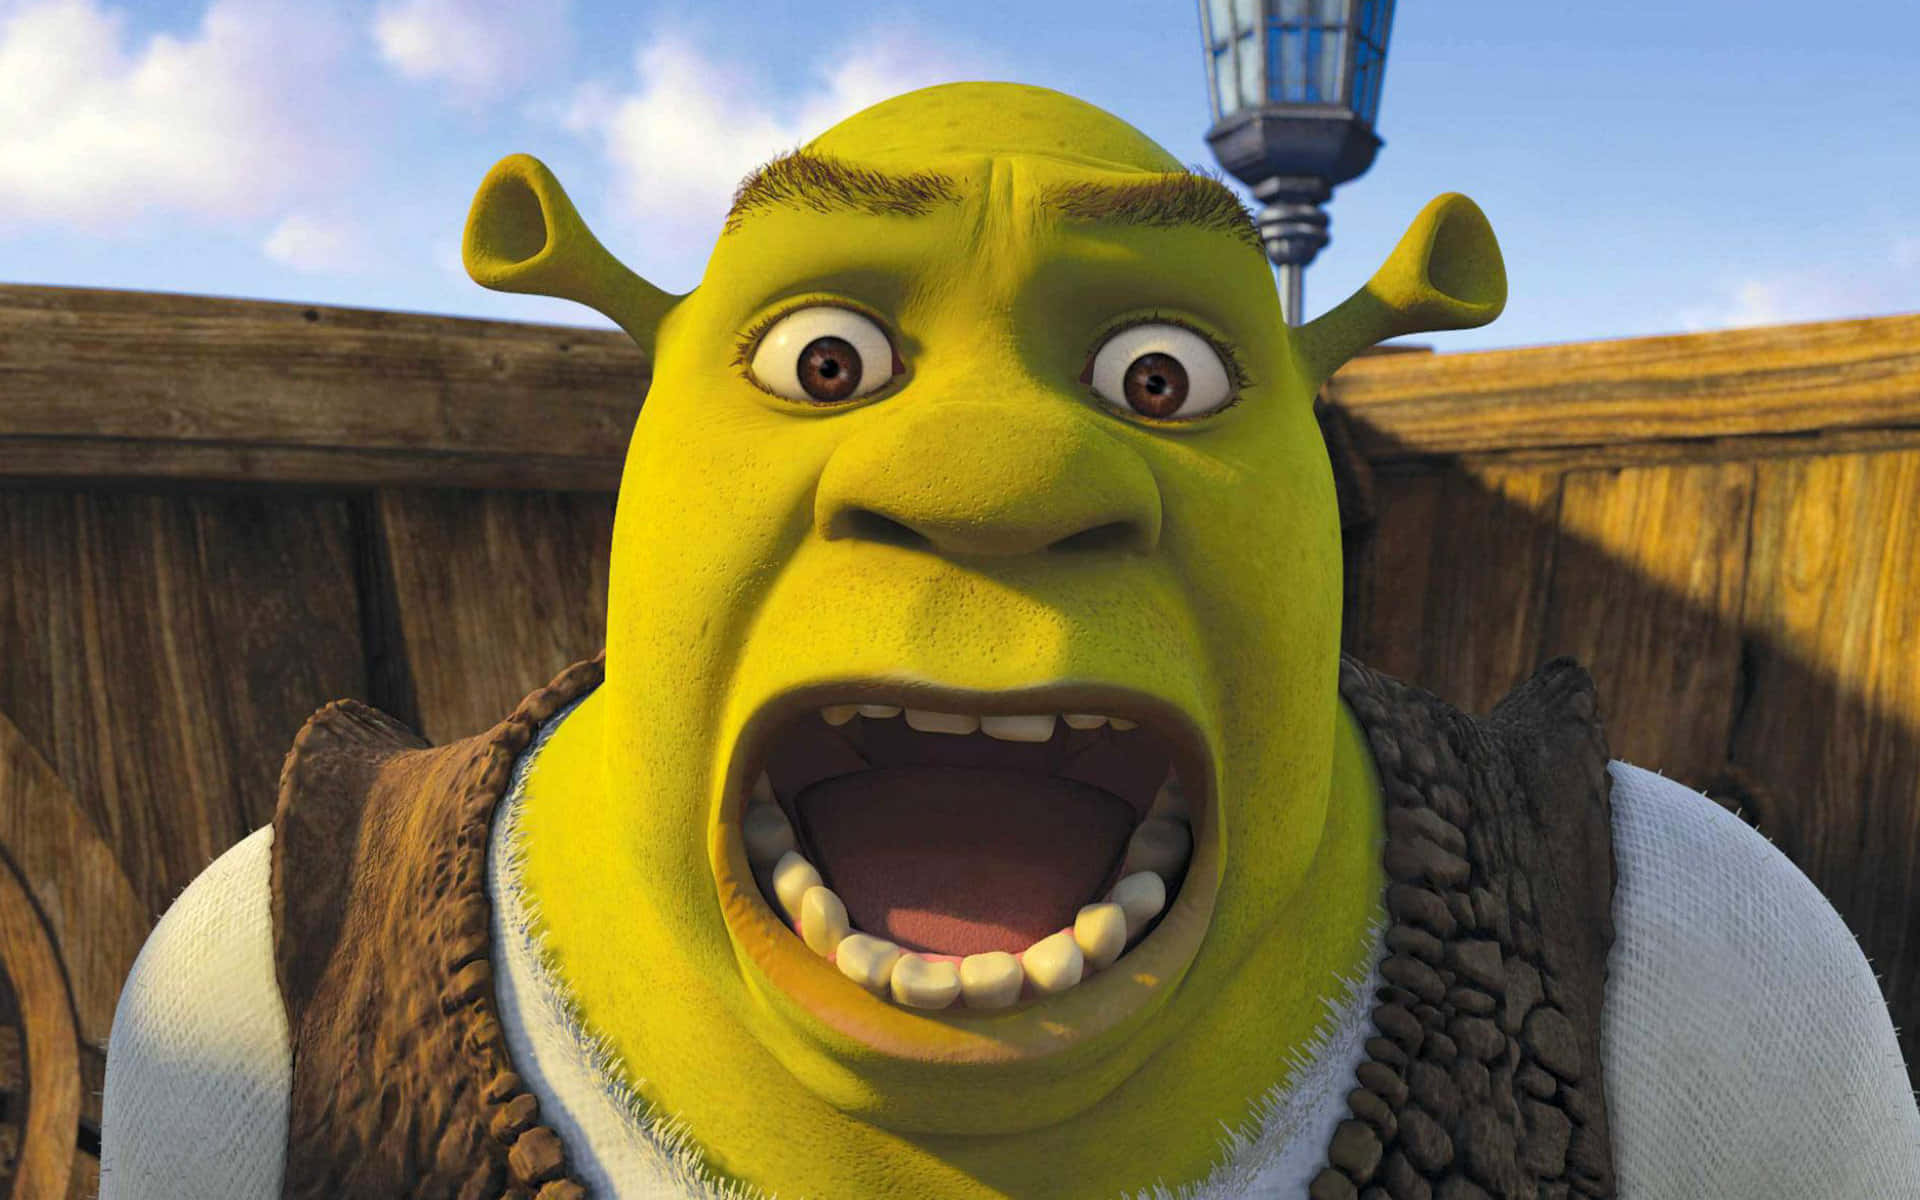 "Shrek knows how to bring the funny" Wallpaper